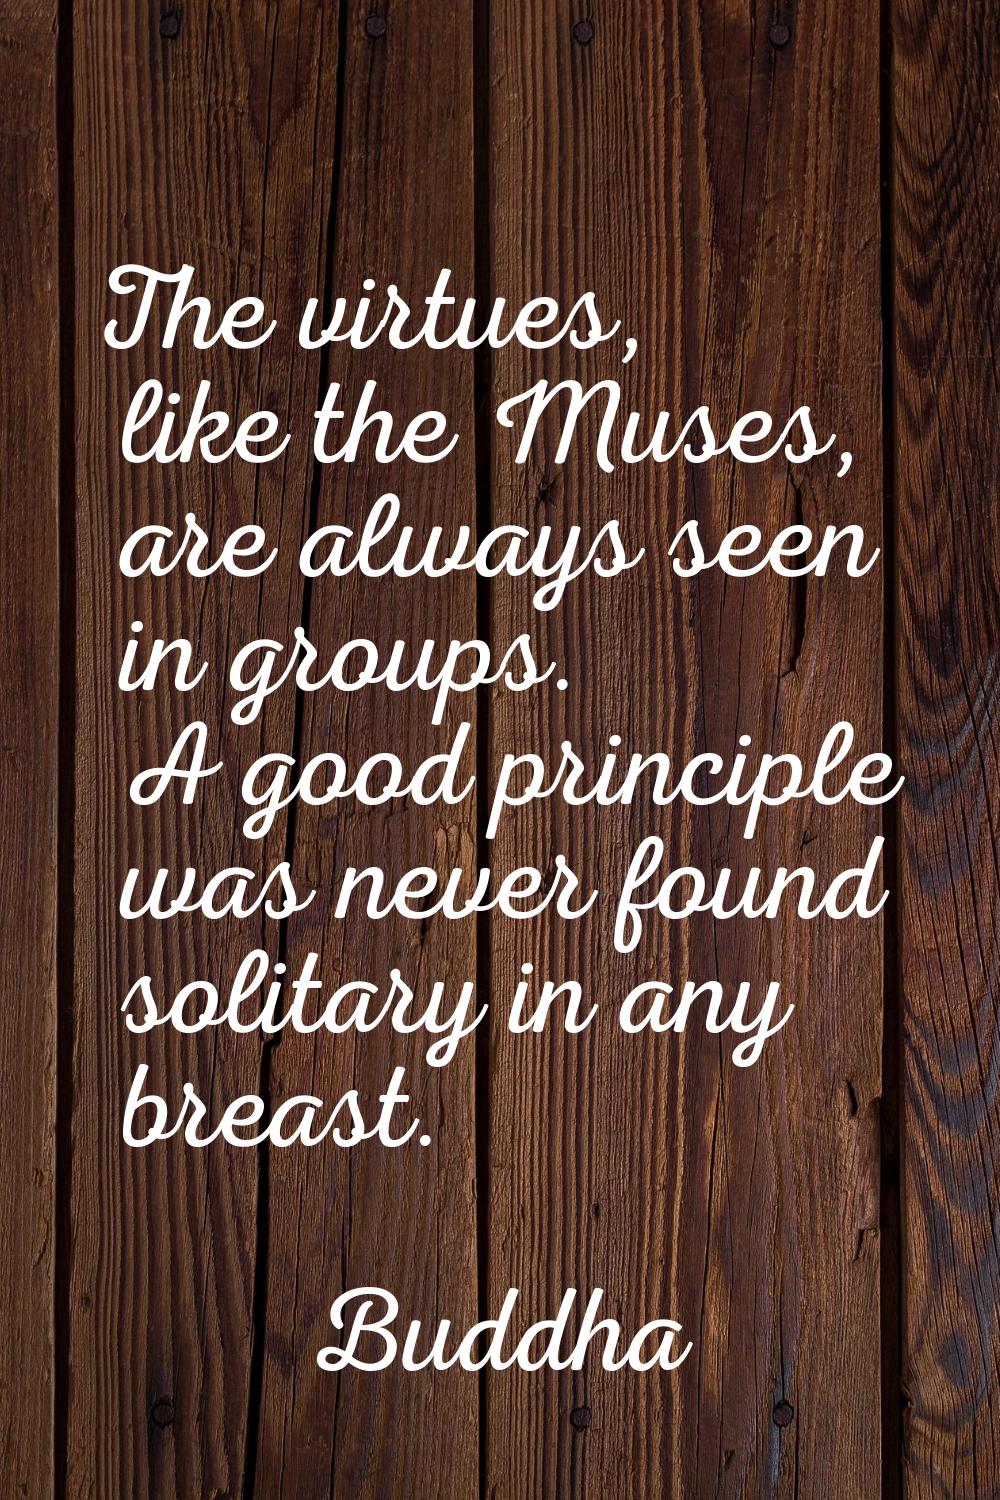 The virtues, like the Muses, are always seen in groups. A good principle was never found solitary i